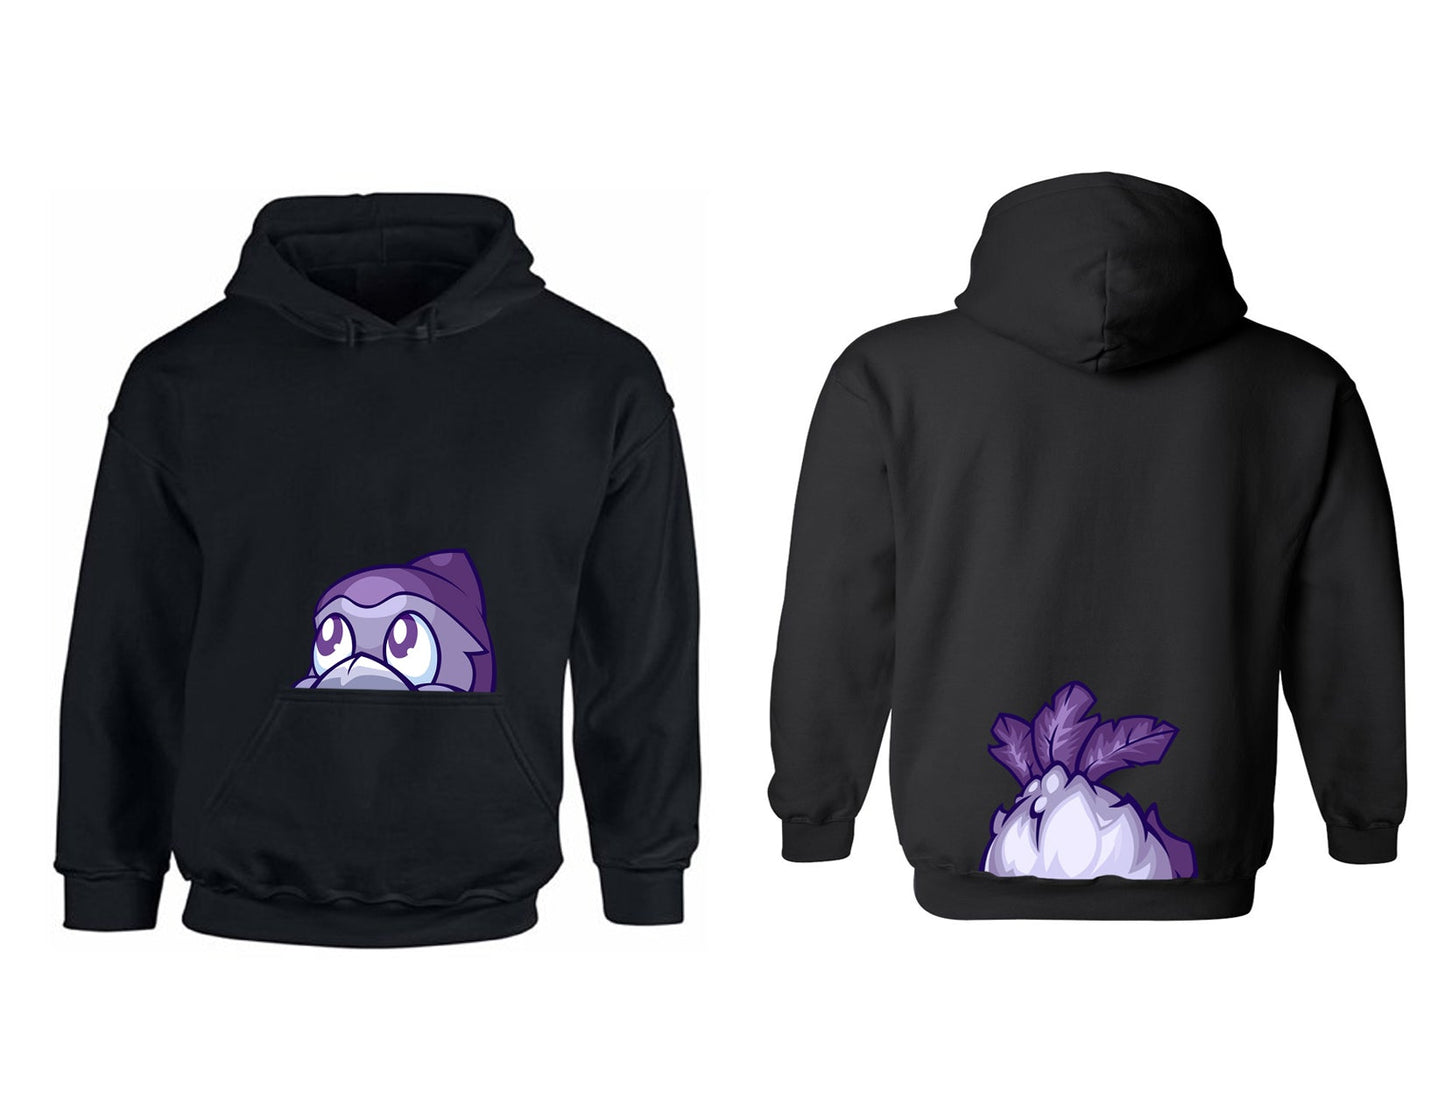 Dangers - Hoodie- Front and Back (Streamer Purchase)